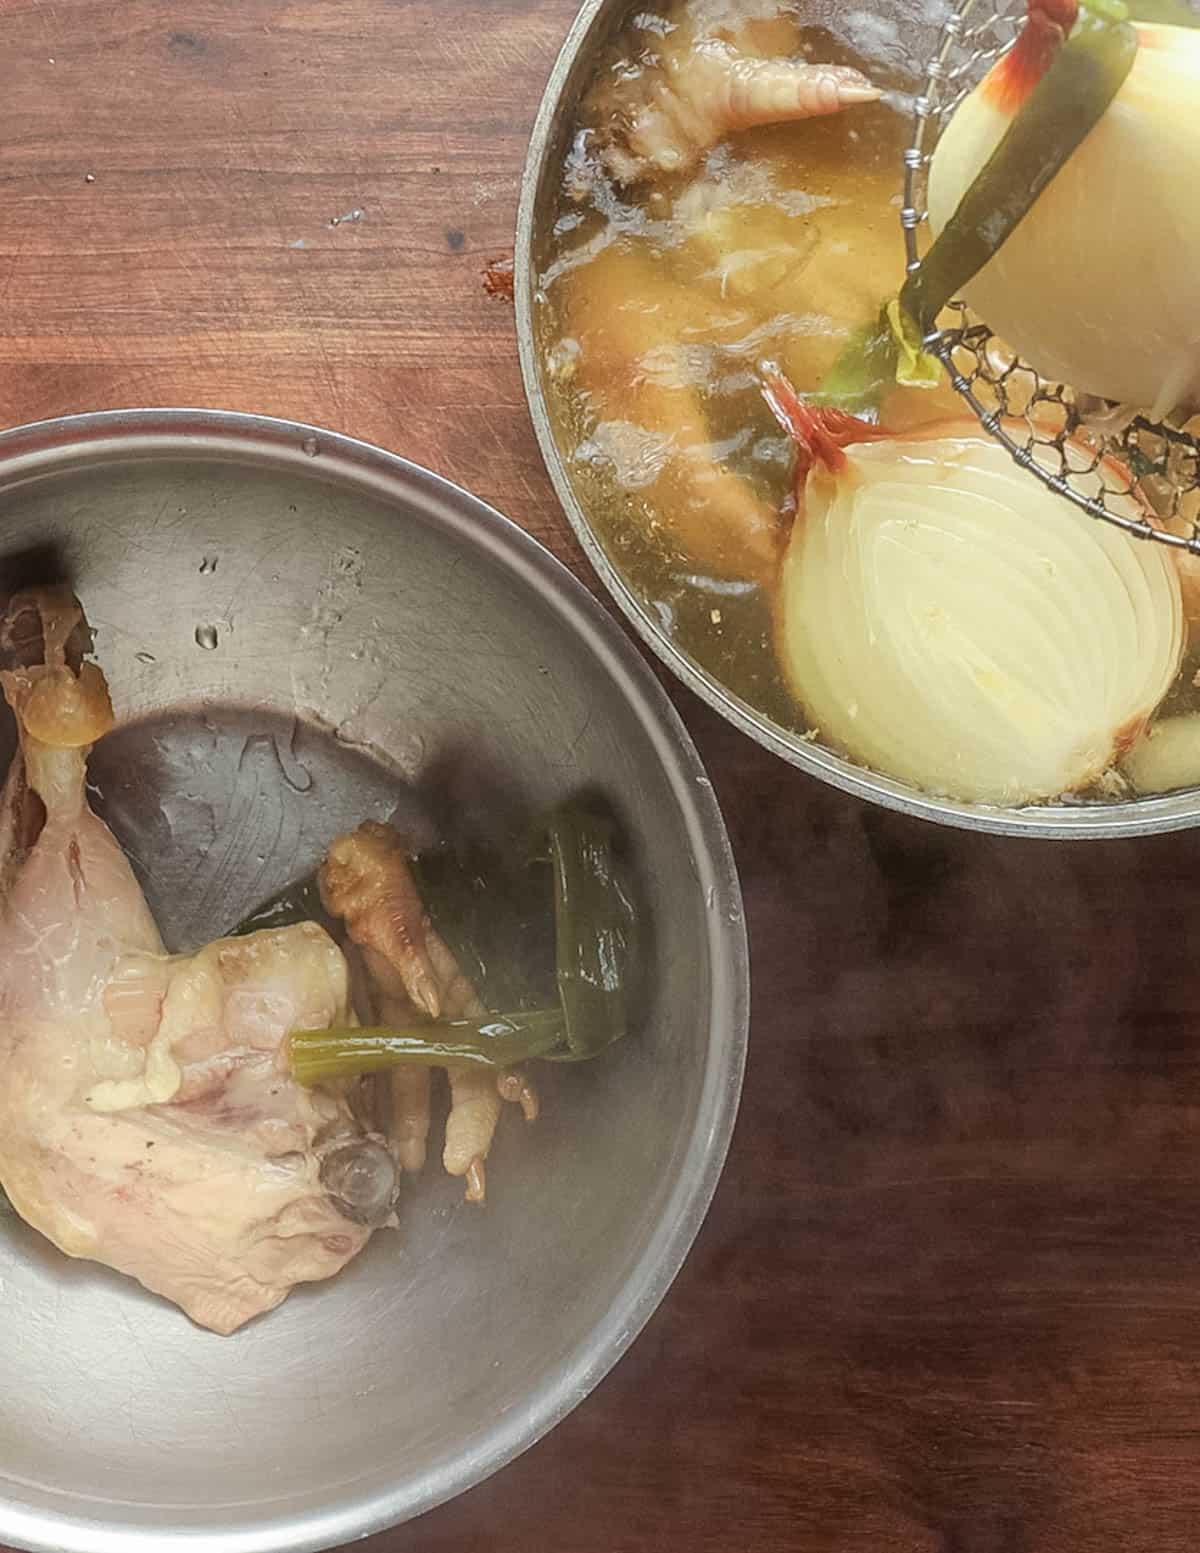 Straining finished ramen broth and reserving chicken legs for soup.